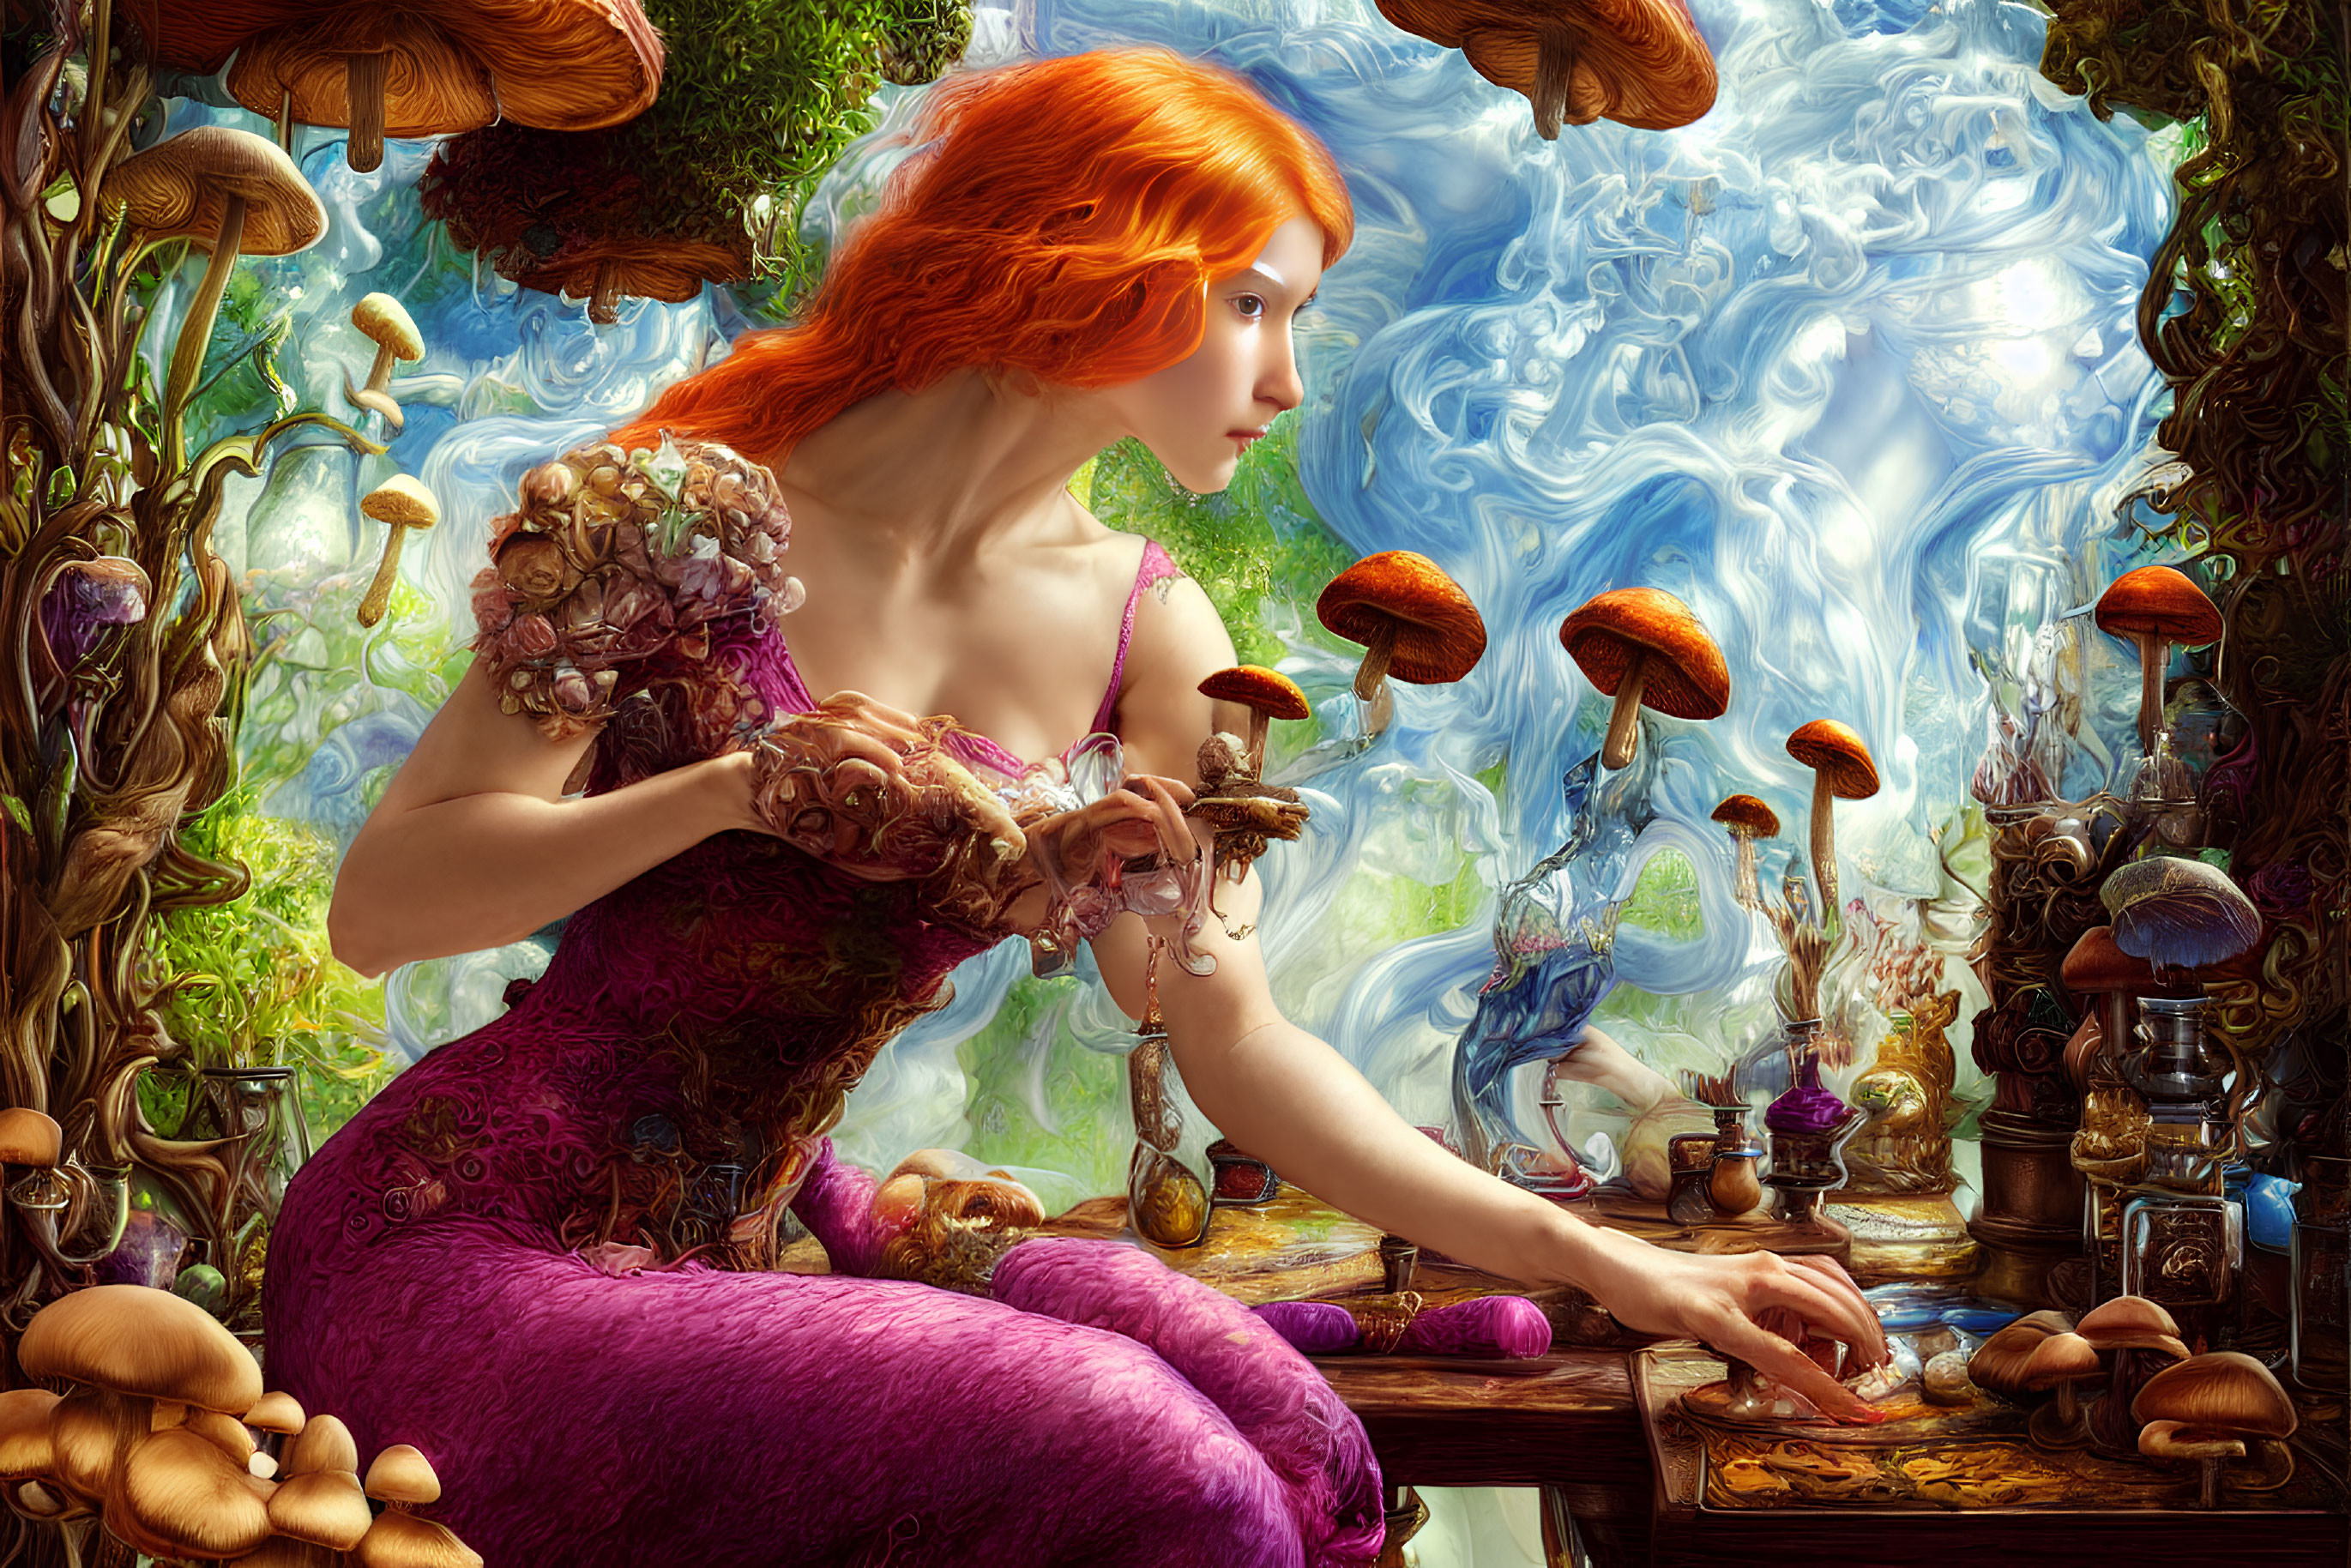 Fiery red-haired woman in purple dress plays magical chess among fantastical mushrooms